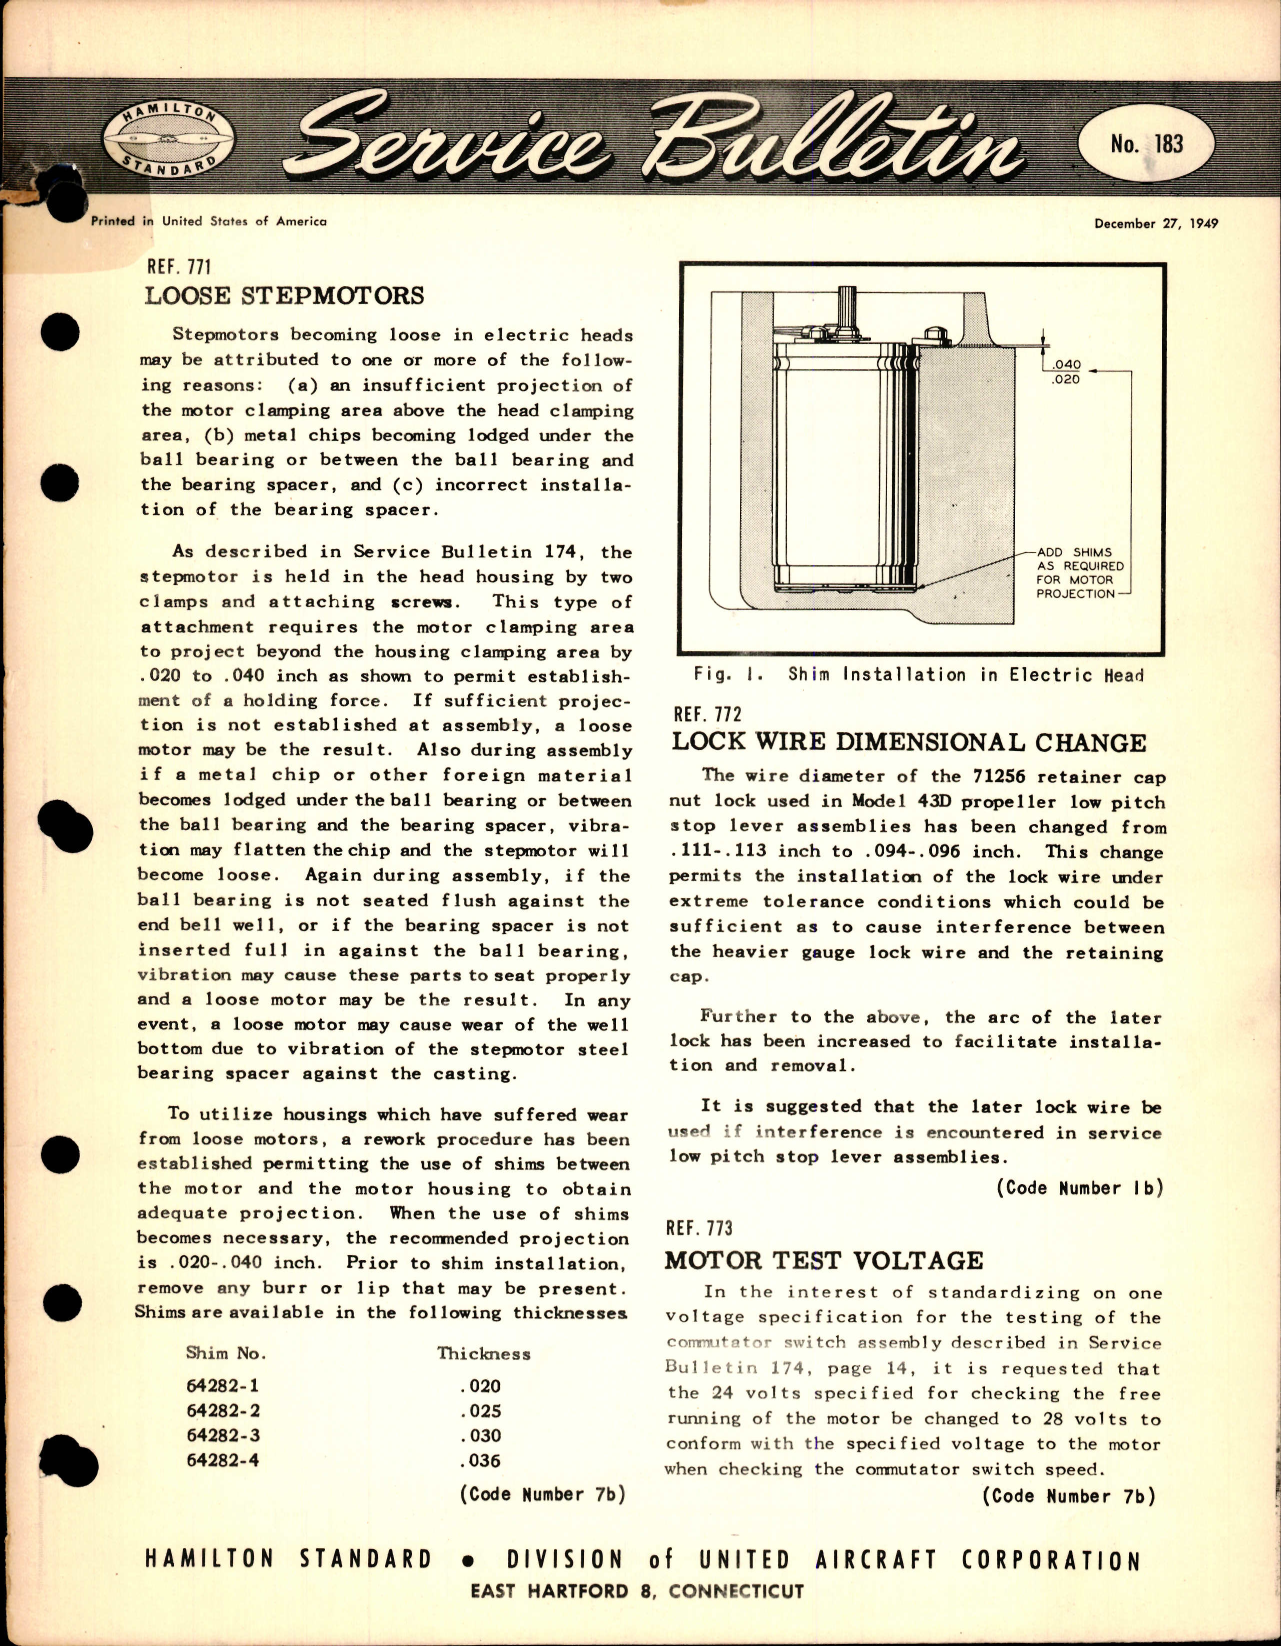 Sample page 1 from AirCorps Library document: Loose Stepmotors, Ref 771